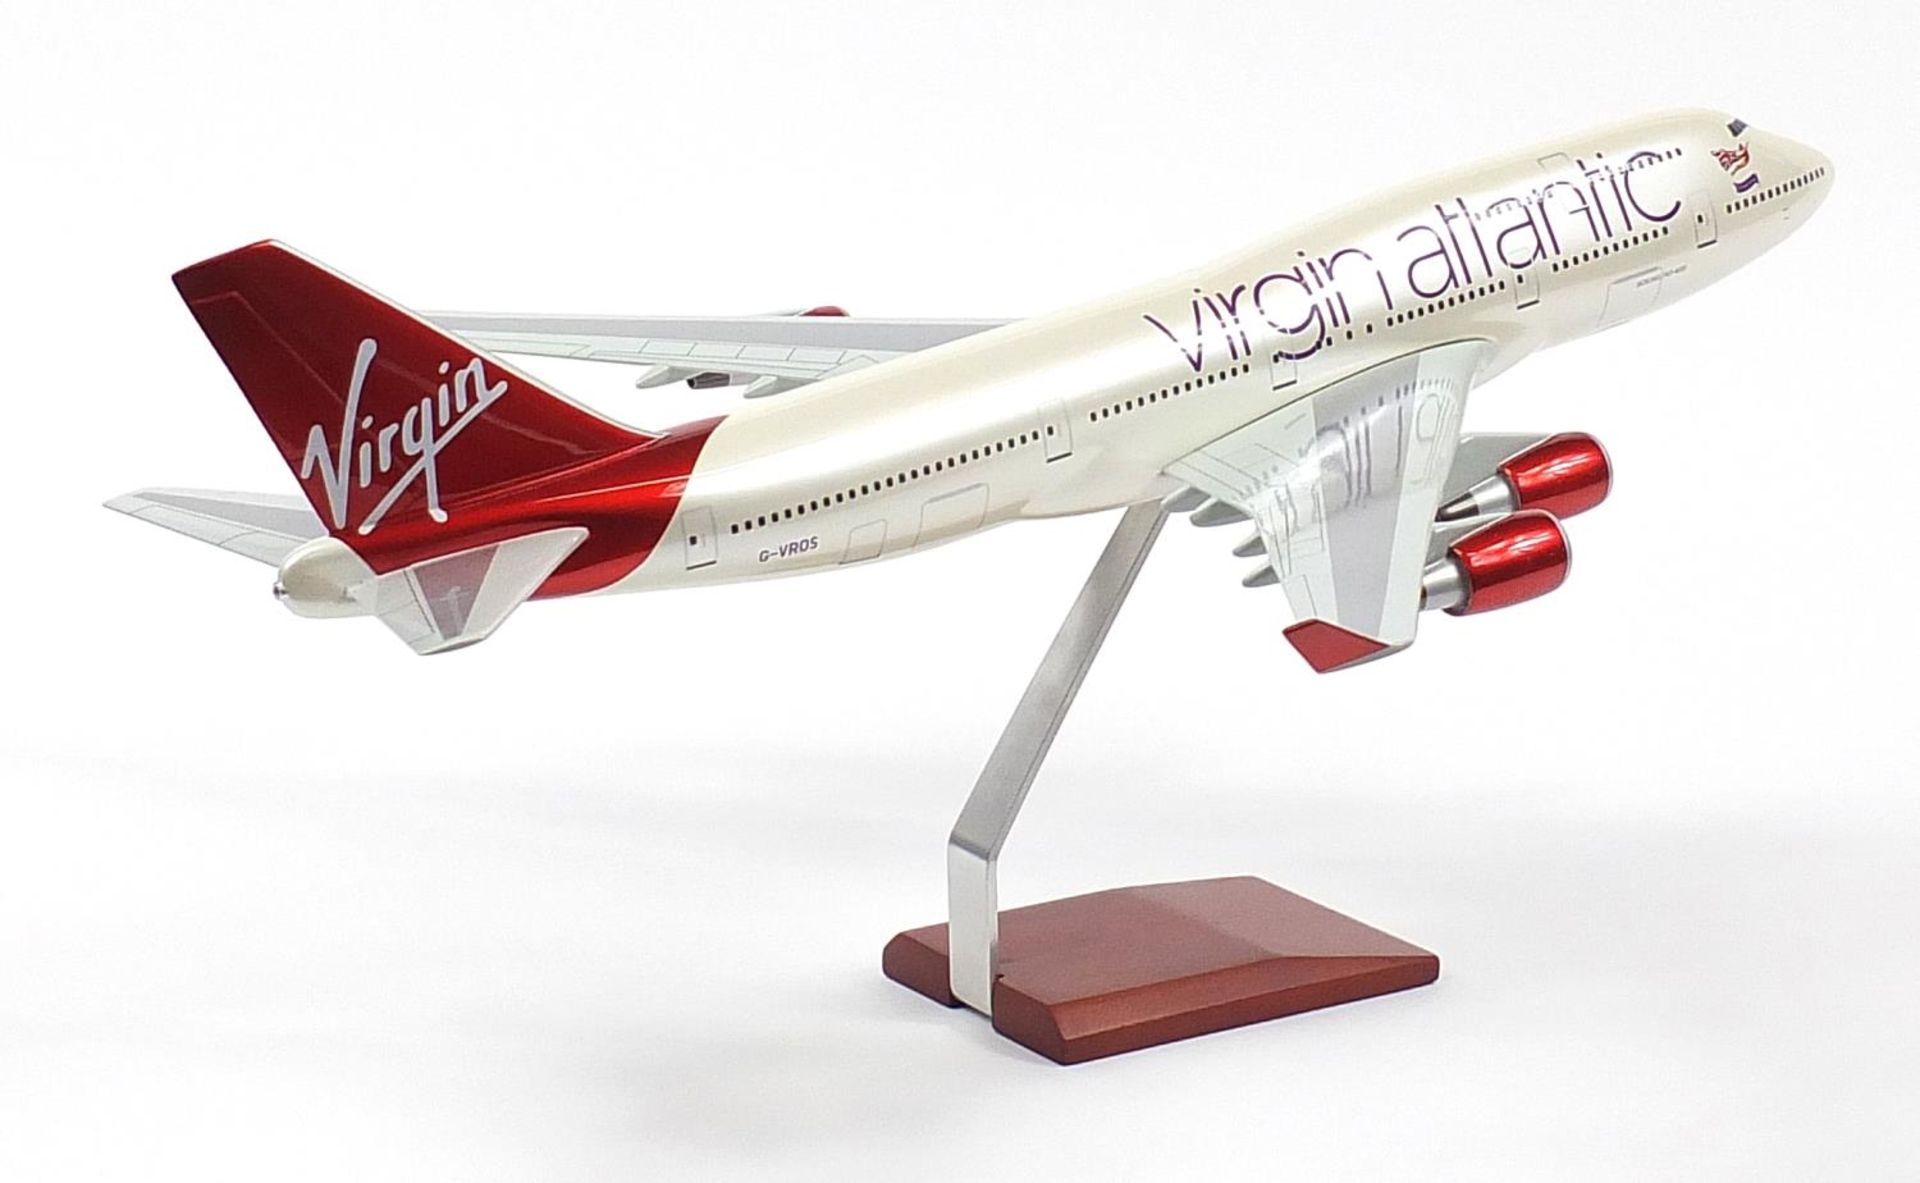 Boeing 747-400 Virgin Atlantic model aeroplane, given to the vendor as a retirement gift, 72cm in - Image 2 of 2